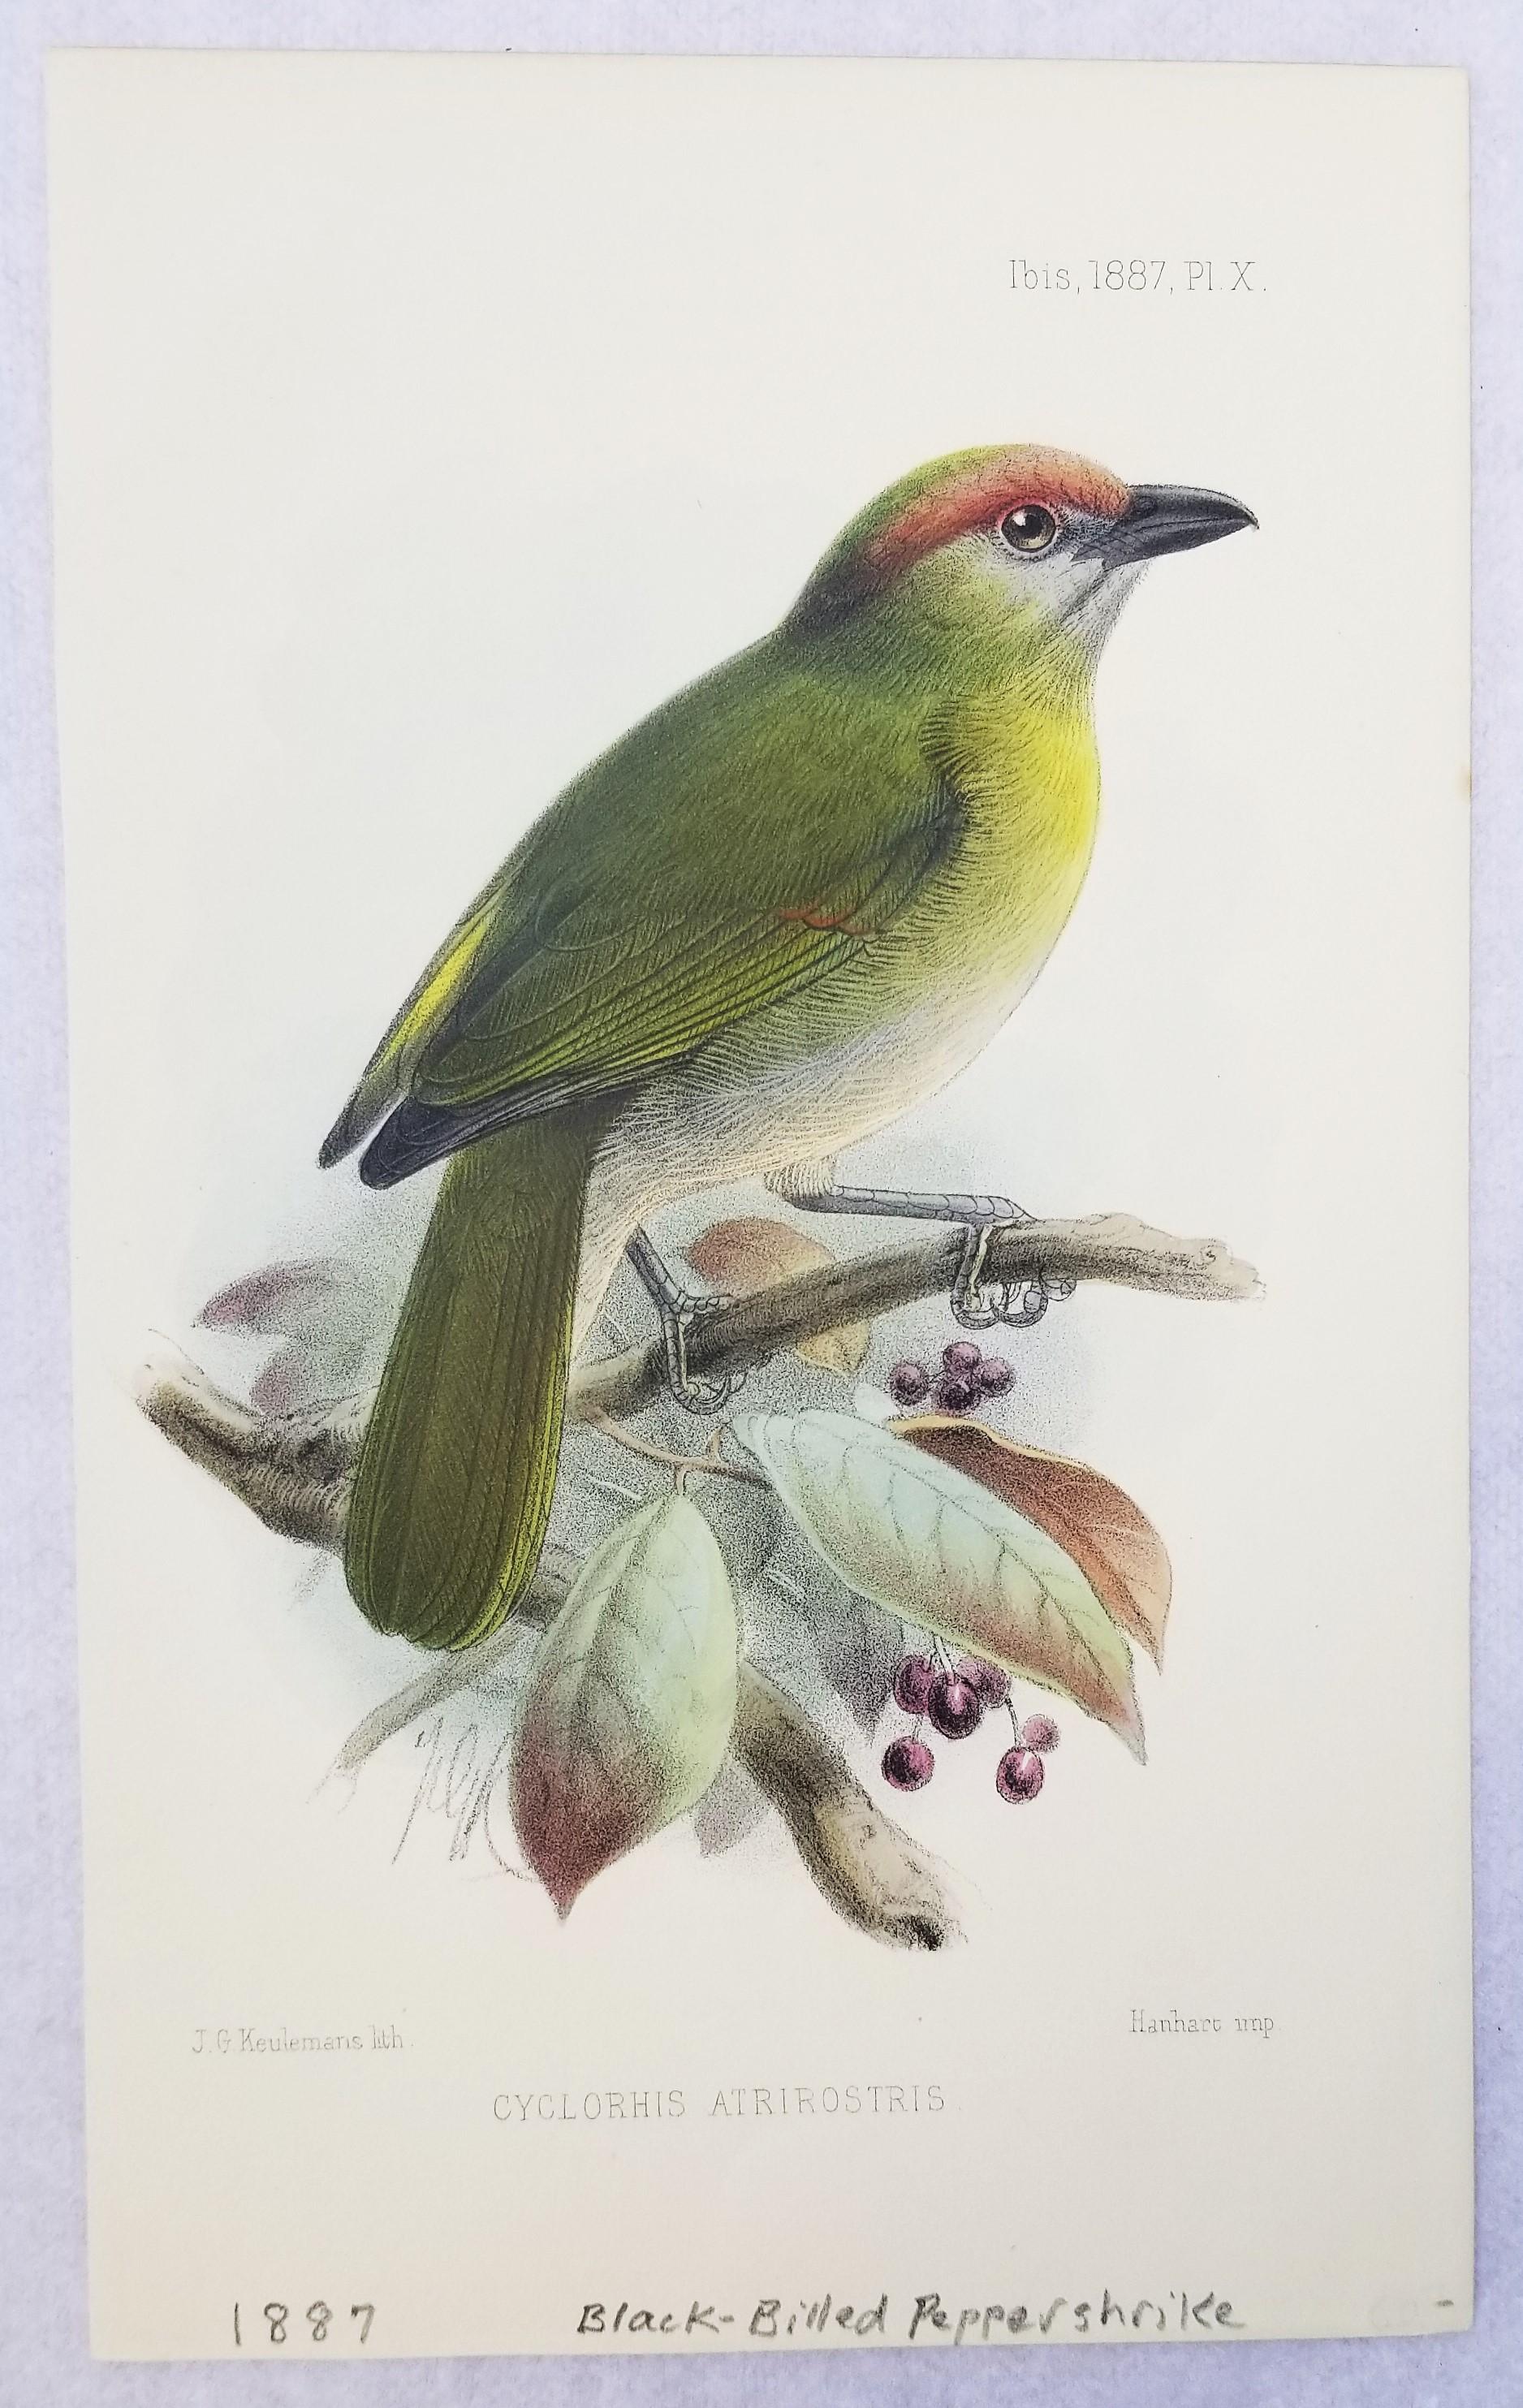 Set of Six Hand-Colored Lithograph Ornithological Prints from 